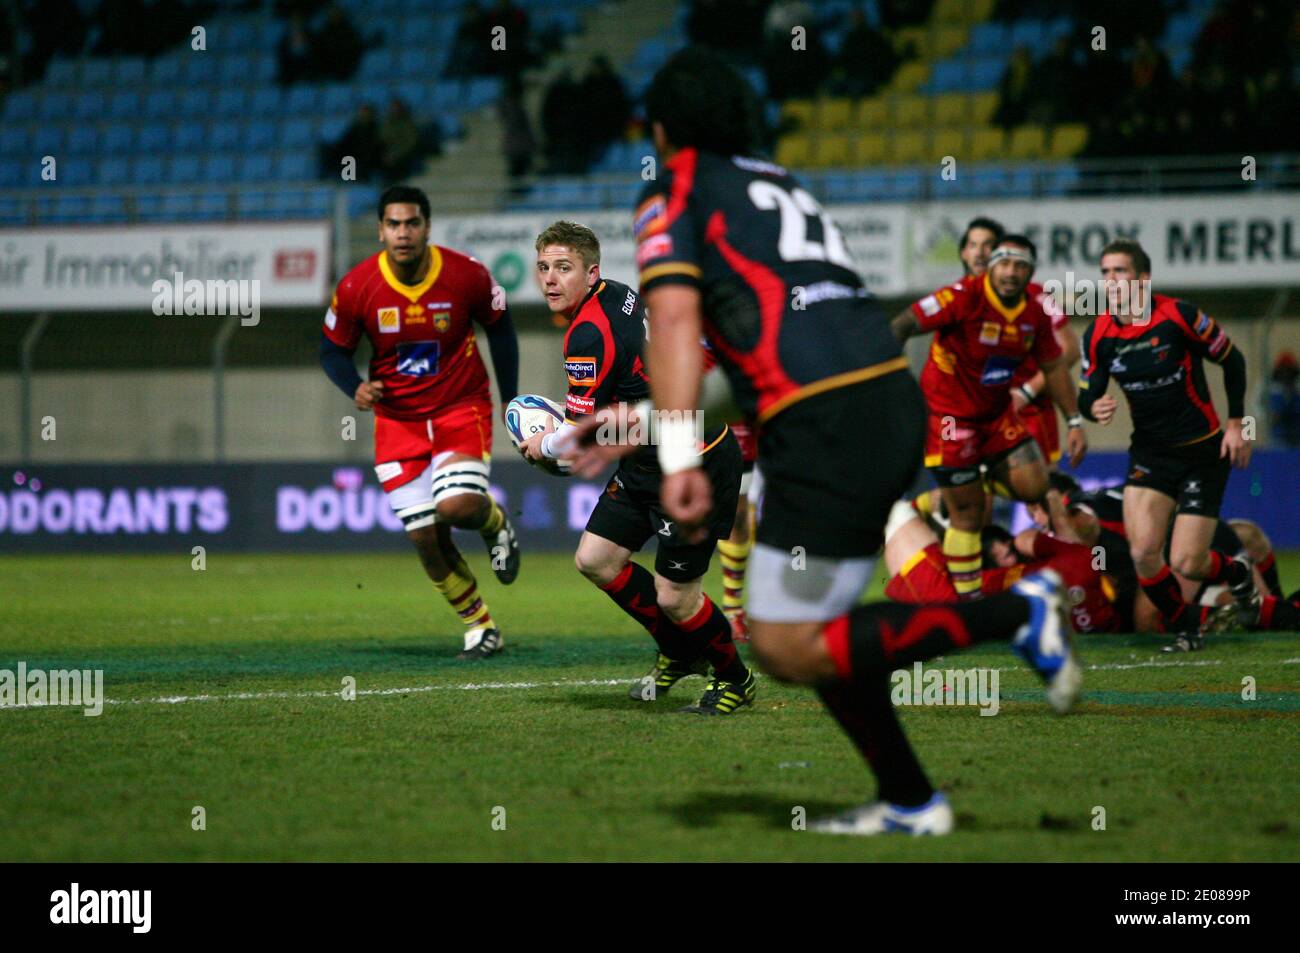 Newport Gwent Dragon's Mattew Jones during the European Amlin Challenge Cup  rugby match, USAP Vs Newport Gwent Dragons at Aime Giral stadium in  Perpignan, south of France on January 14, 20121. USAP